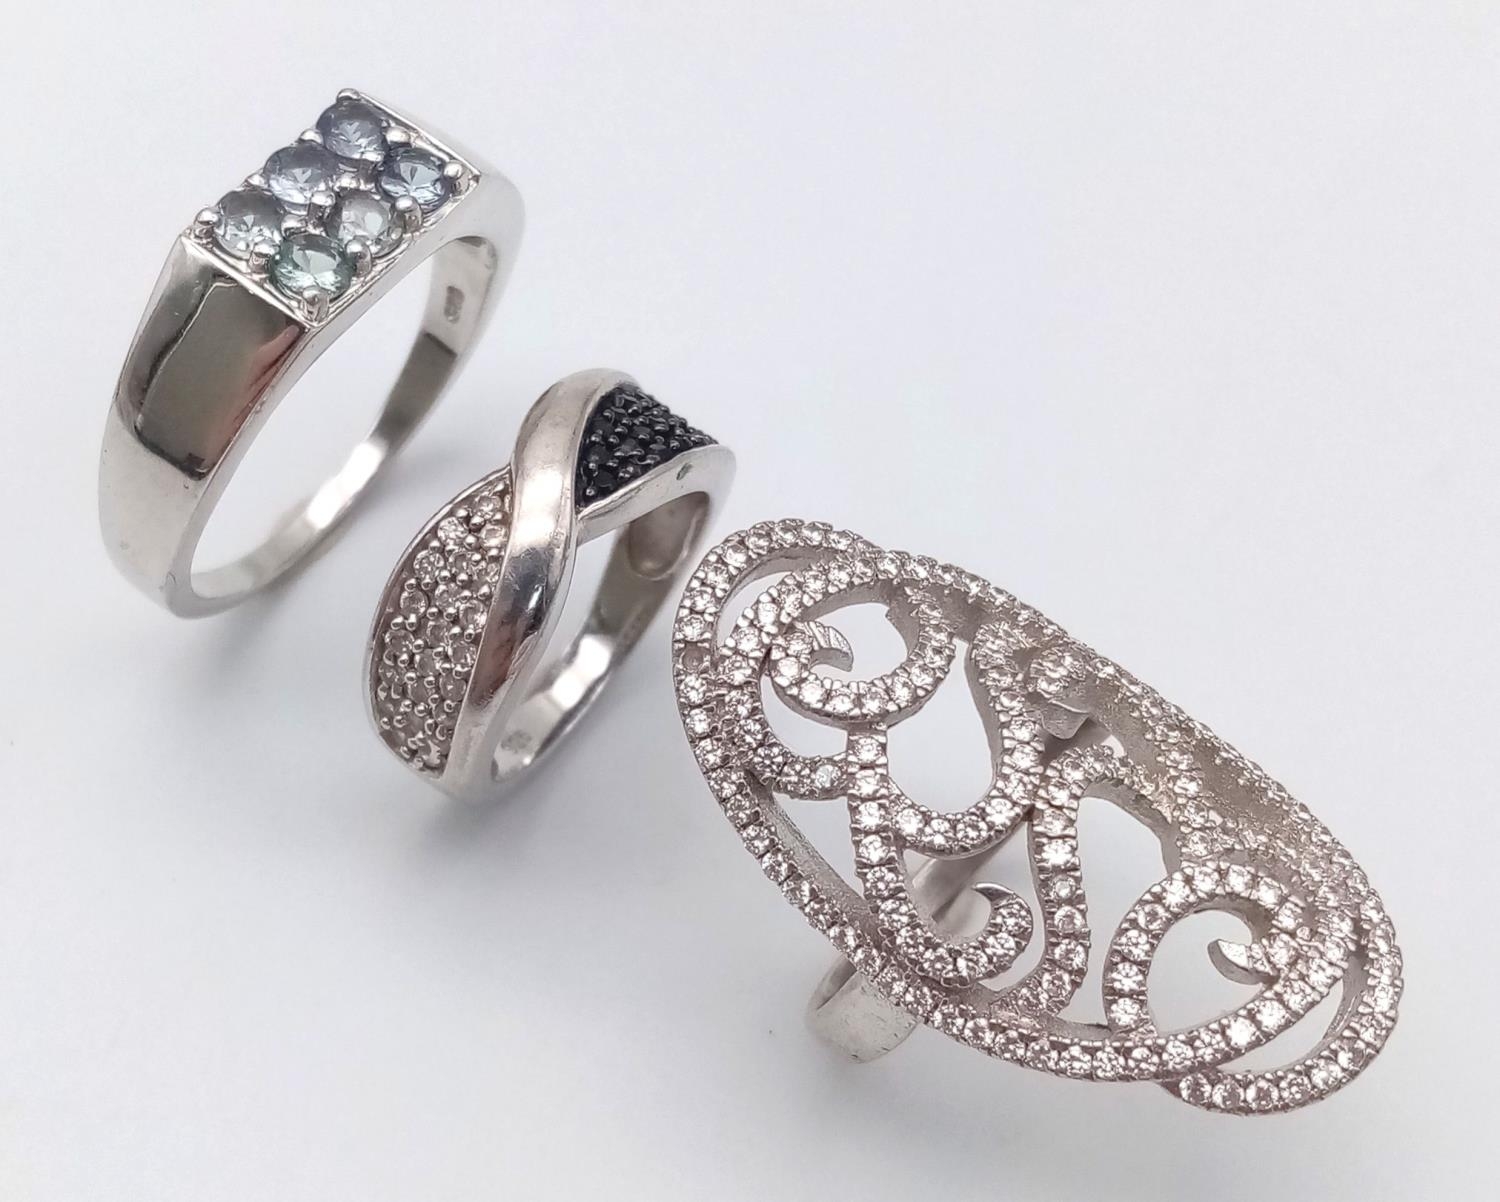 Three 925 Silver Different Style Stone Set Rings. Sizes: J, M and V.